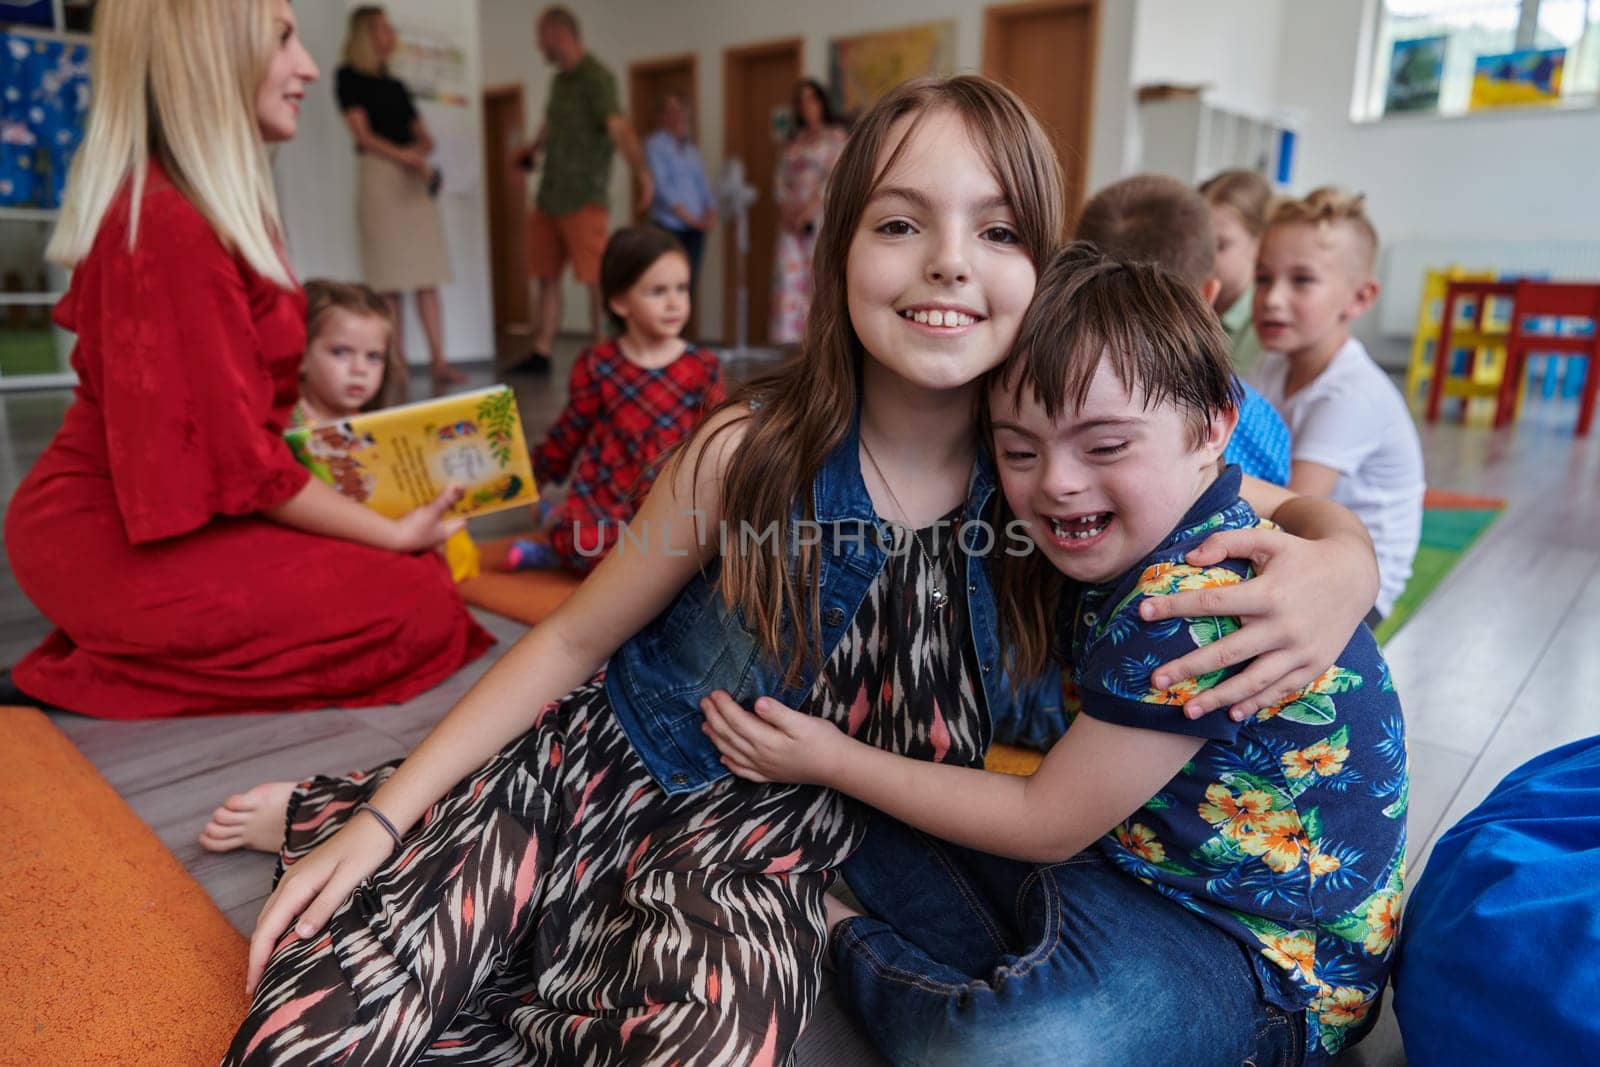 A girl and a boy with Down's syndrome in each other's arms spend time together in a preschool institution by dotshock